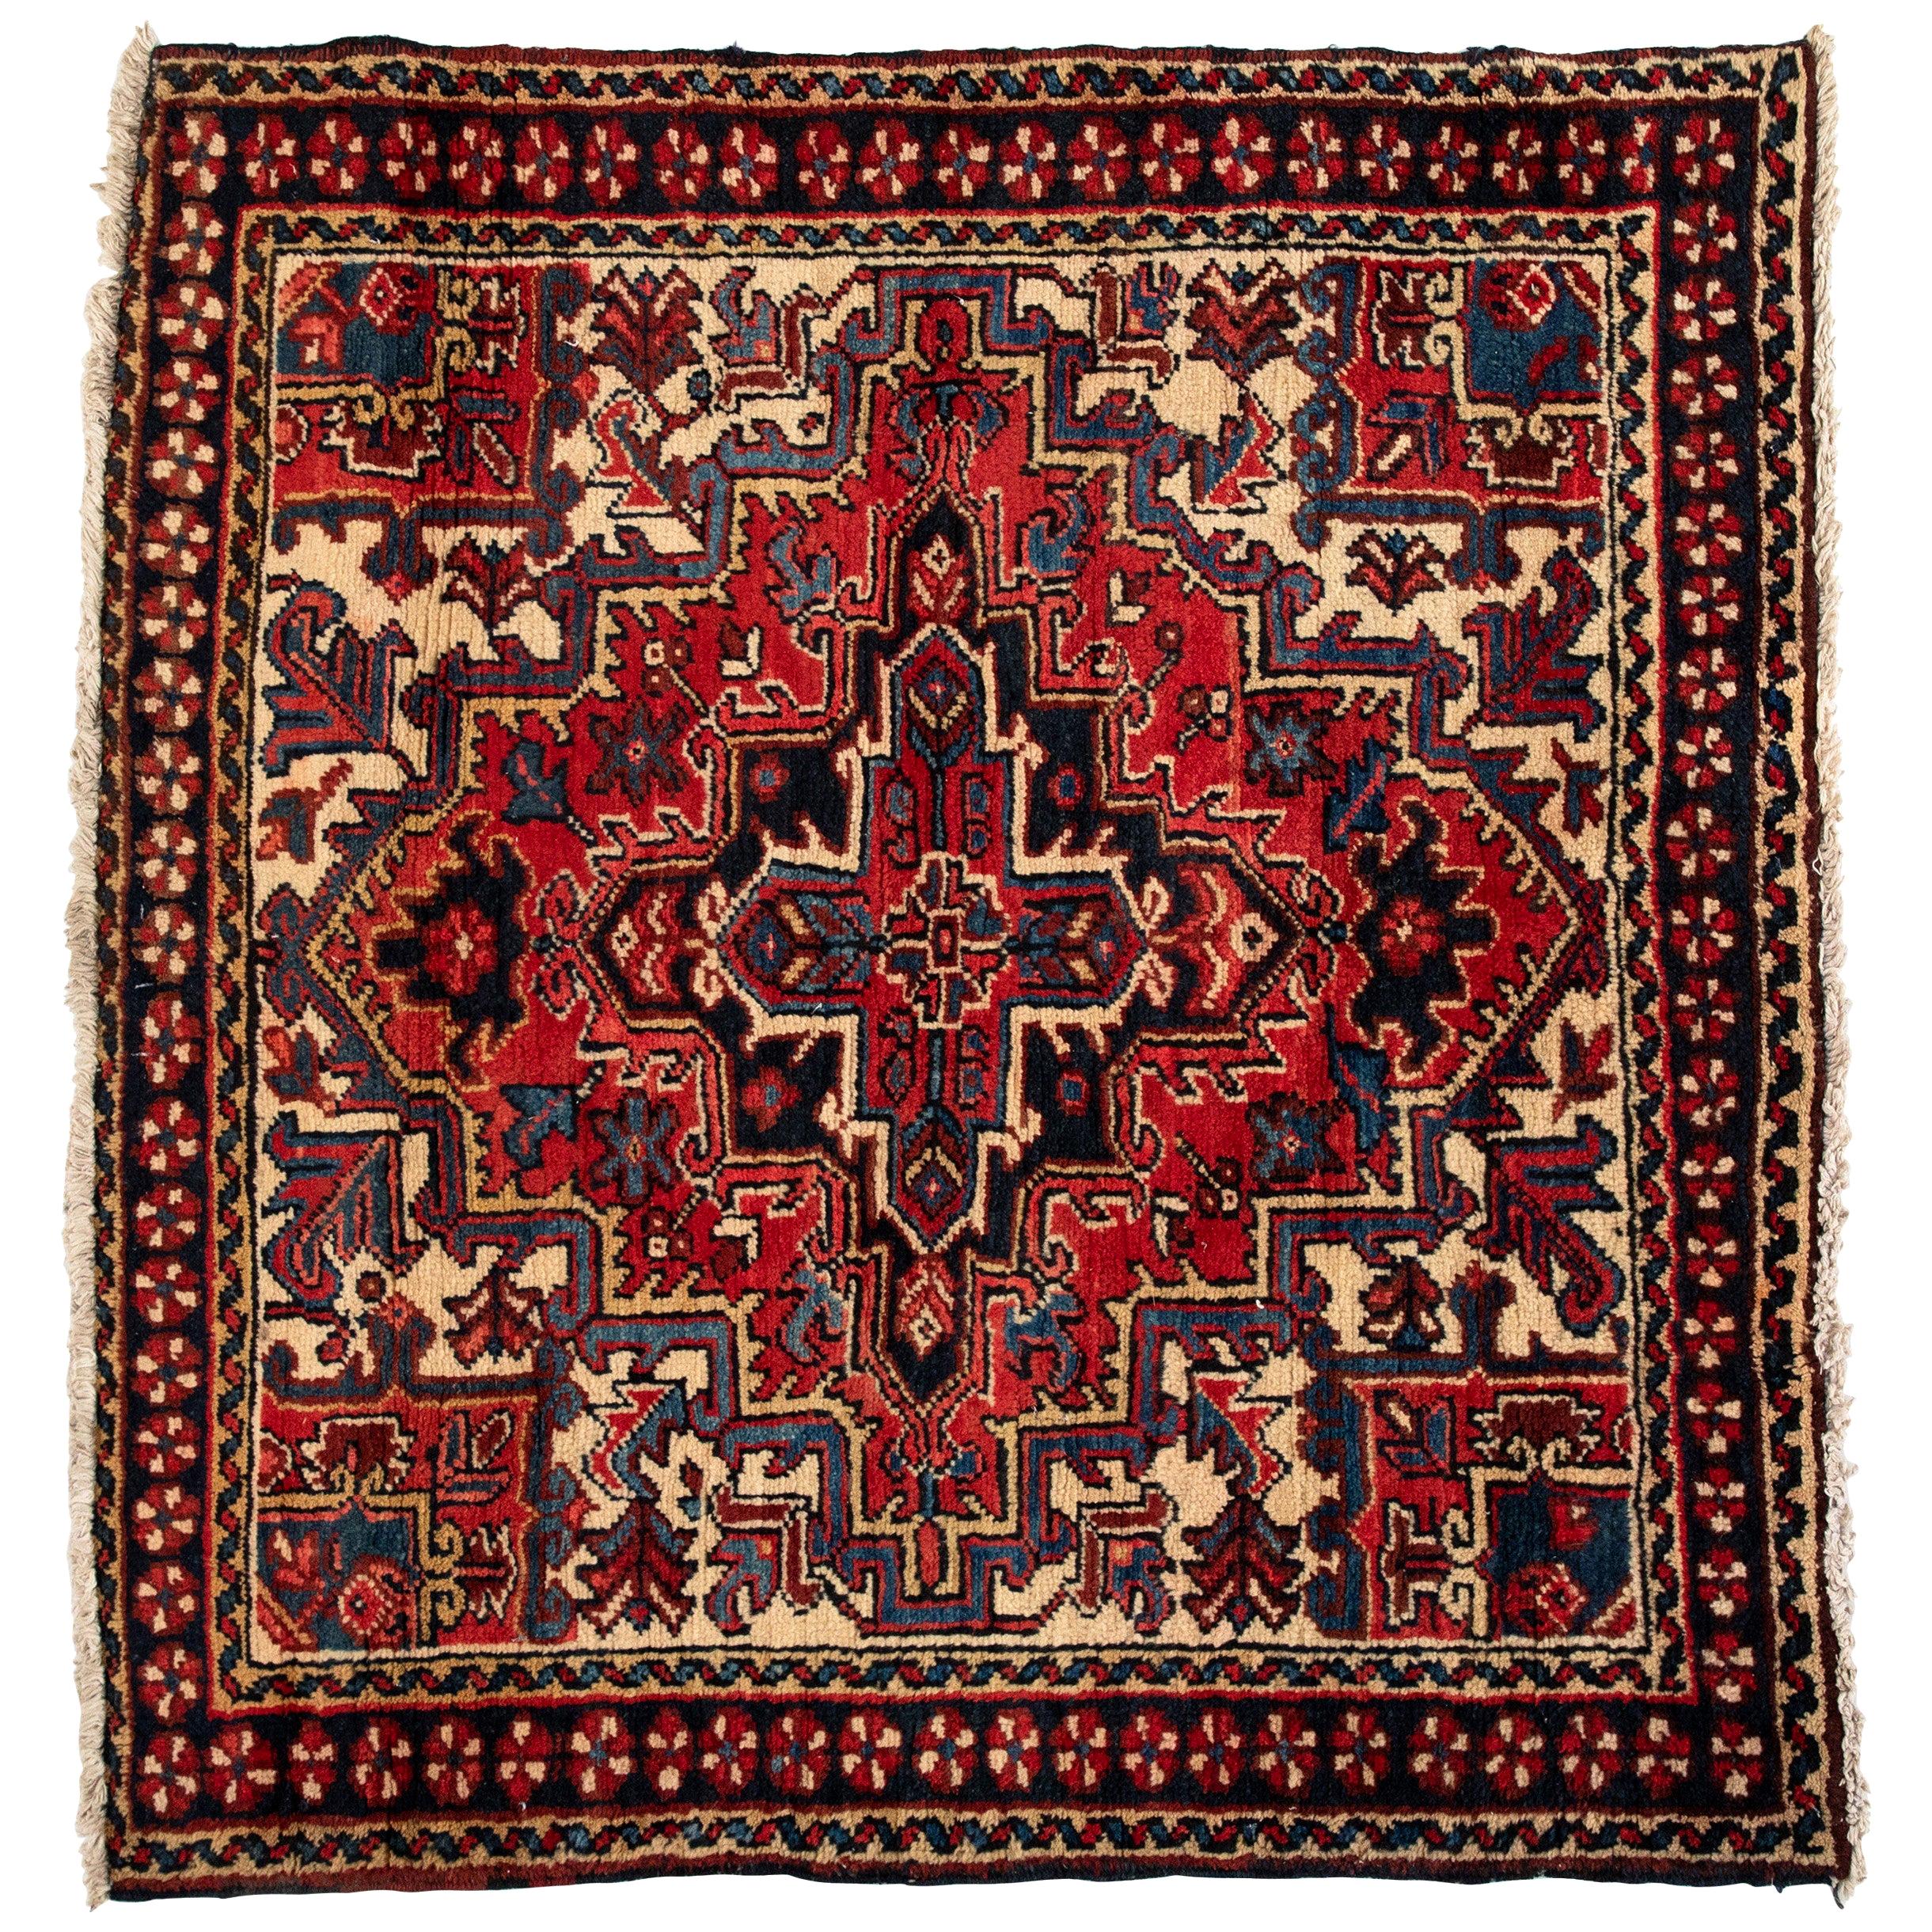 Antique Small Persian Red Ivory Navy Blue Geometric Square Heriz Rug circa 1950s For Sale